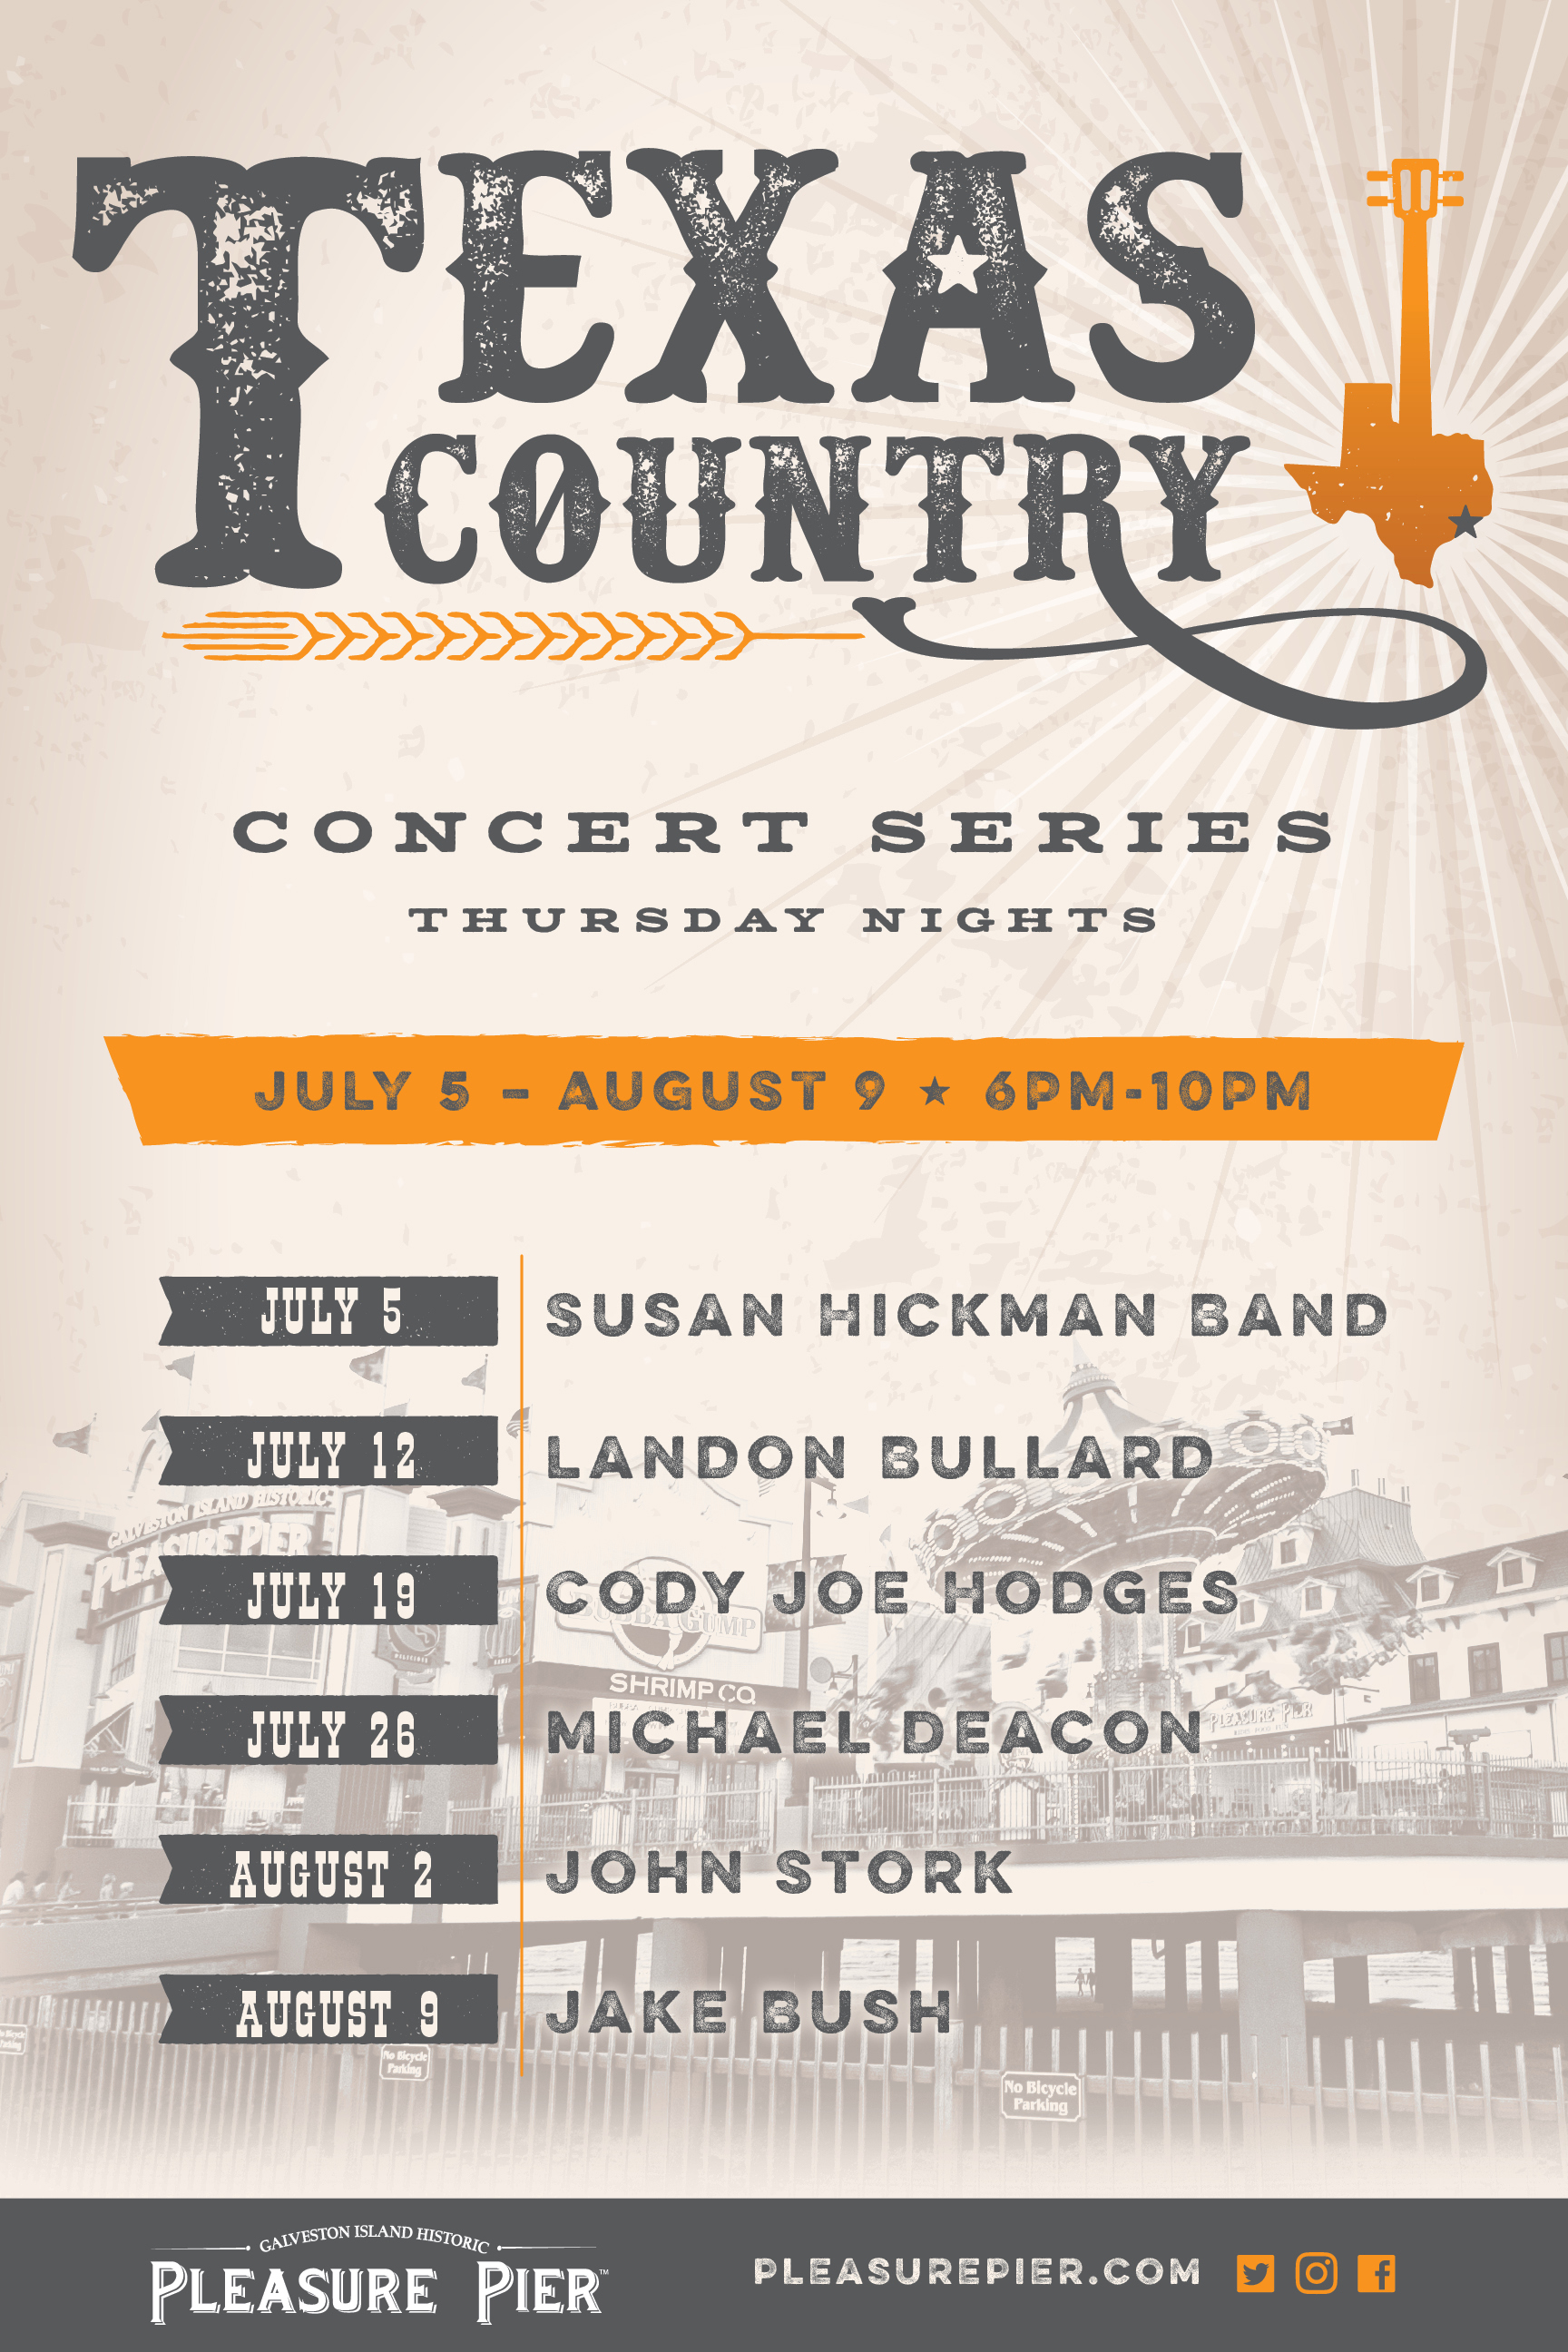 Texas Country Concert Series on Thursday Nights from July 5 to August 9